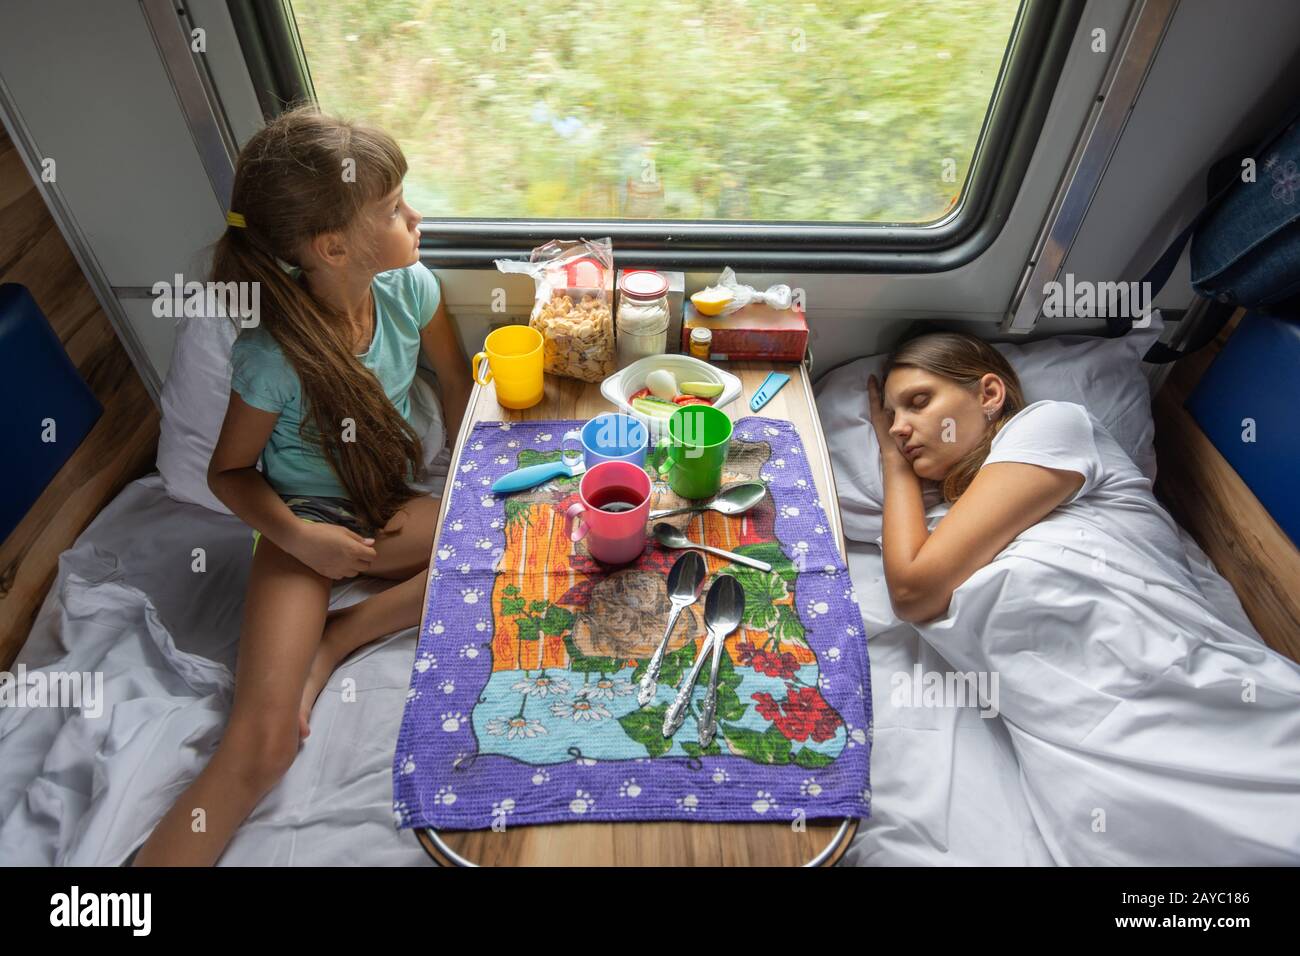 The situation on the train, mom is sleeping, daughter is looking out the window, top view Stock Photo